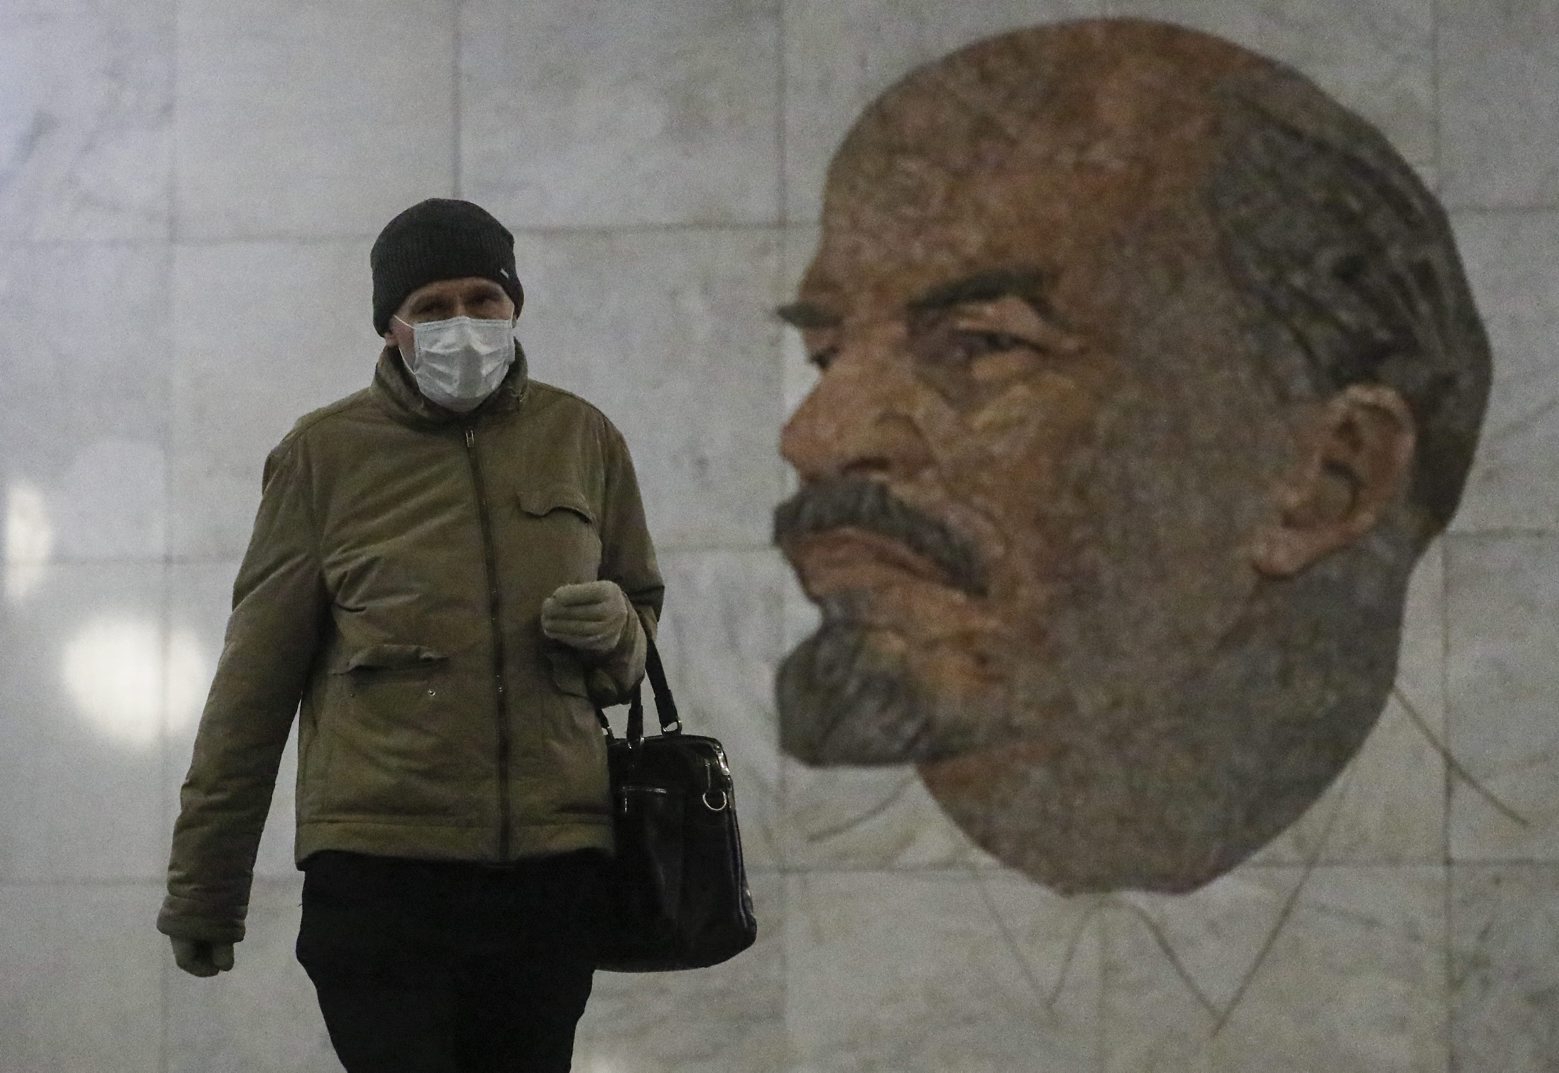 epa08419500 A commuter wearing a face mask and gloves walks in front of a famous mosaic depicting the portrait of Soviet Union founder Vladimir Ilyich Ulyanov (1870-1924) â?? better known by his nom de guerre, 'Lenin' â?? created in 1965 by artist Grigory Opryshko at the Biblioteka Imeni Lenina metro station in Moscow, Russia, 13 May 2020. Last week, Moscow Mayor Sergey Sobyanin announced that work would resume at industrial and construction businesses in Moscow starting on 12 May as part of an economic reactivation plan amid the ongoing pandemic of the COVID-19 disease caused by the SARS-CoV-2 coronavirus. Residents of the Russian capital are now required to wear face masks and gloves when using public transport and inside shops. Other restrictions, such as the closure of public parks and general stay-at-home and social distancing guidances, are set to remain in place until 31 May.  EPA/SERGEI ILNITSKY RUSSIA PANDEMIC CORONAVIRUS COVID19